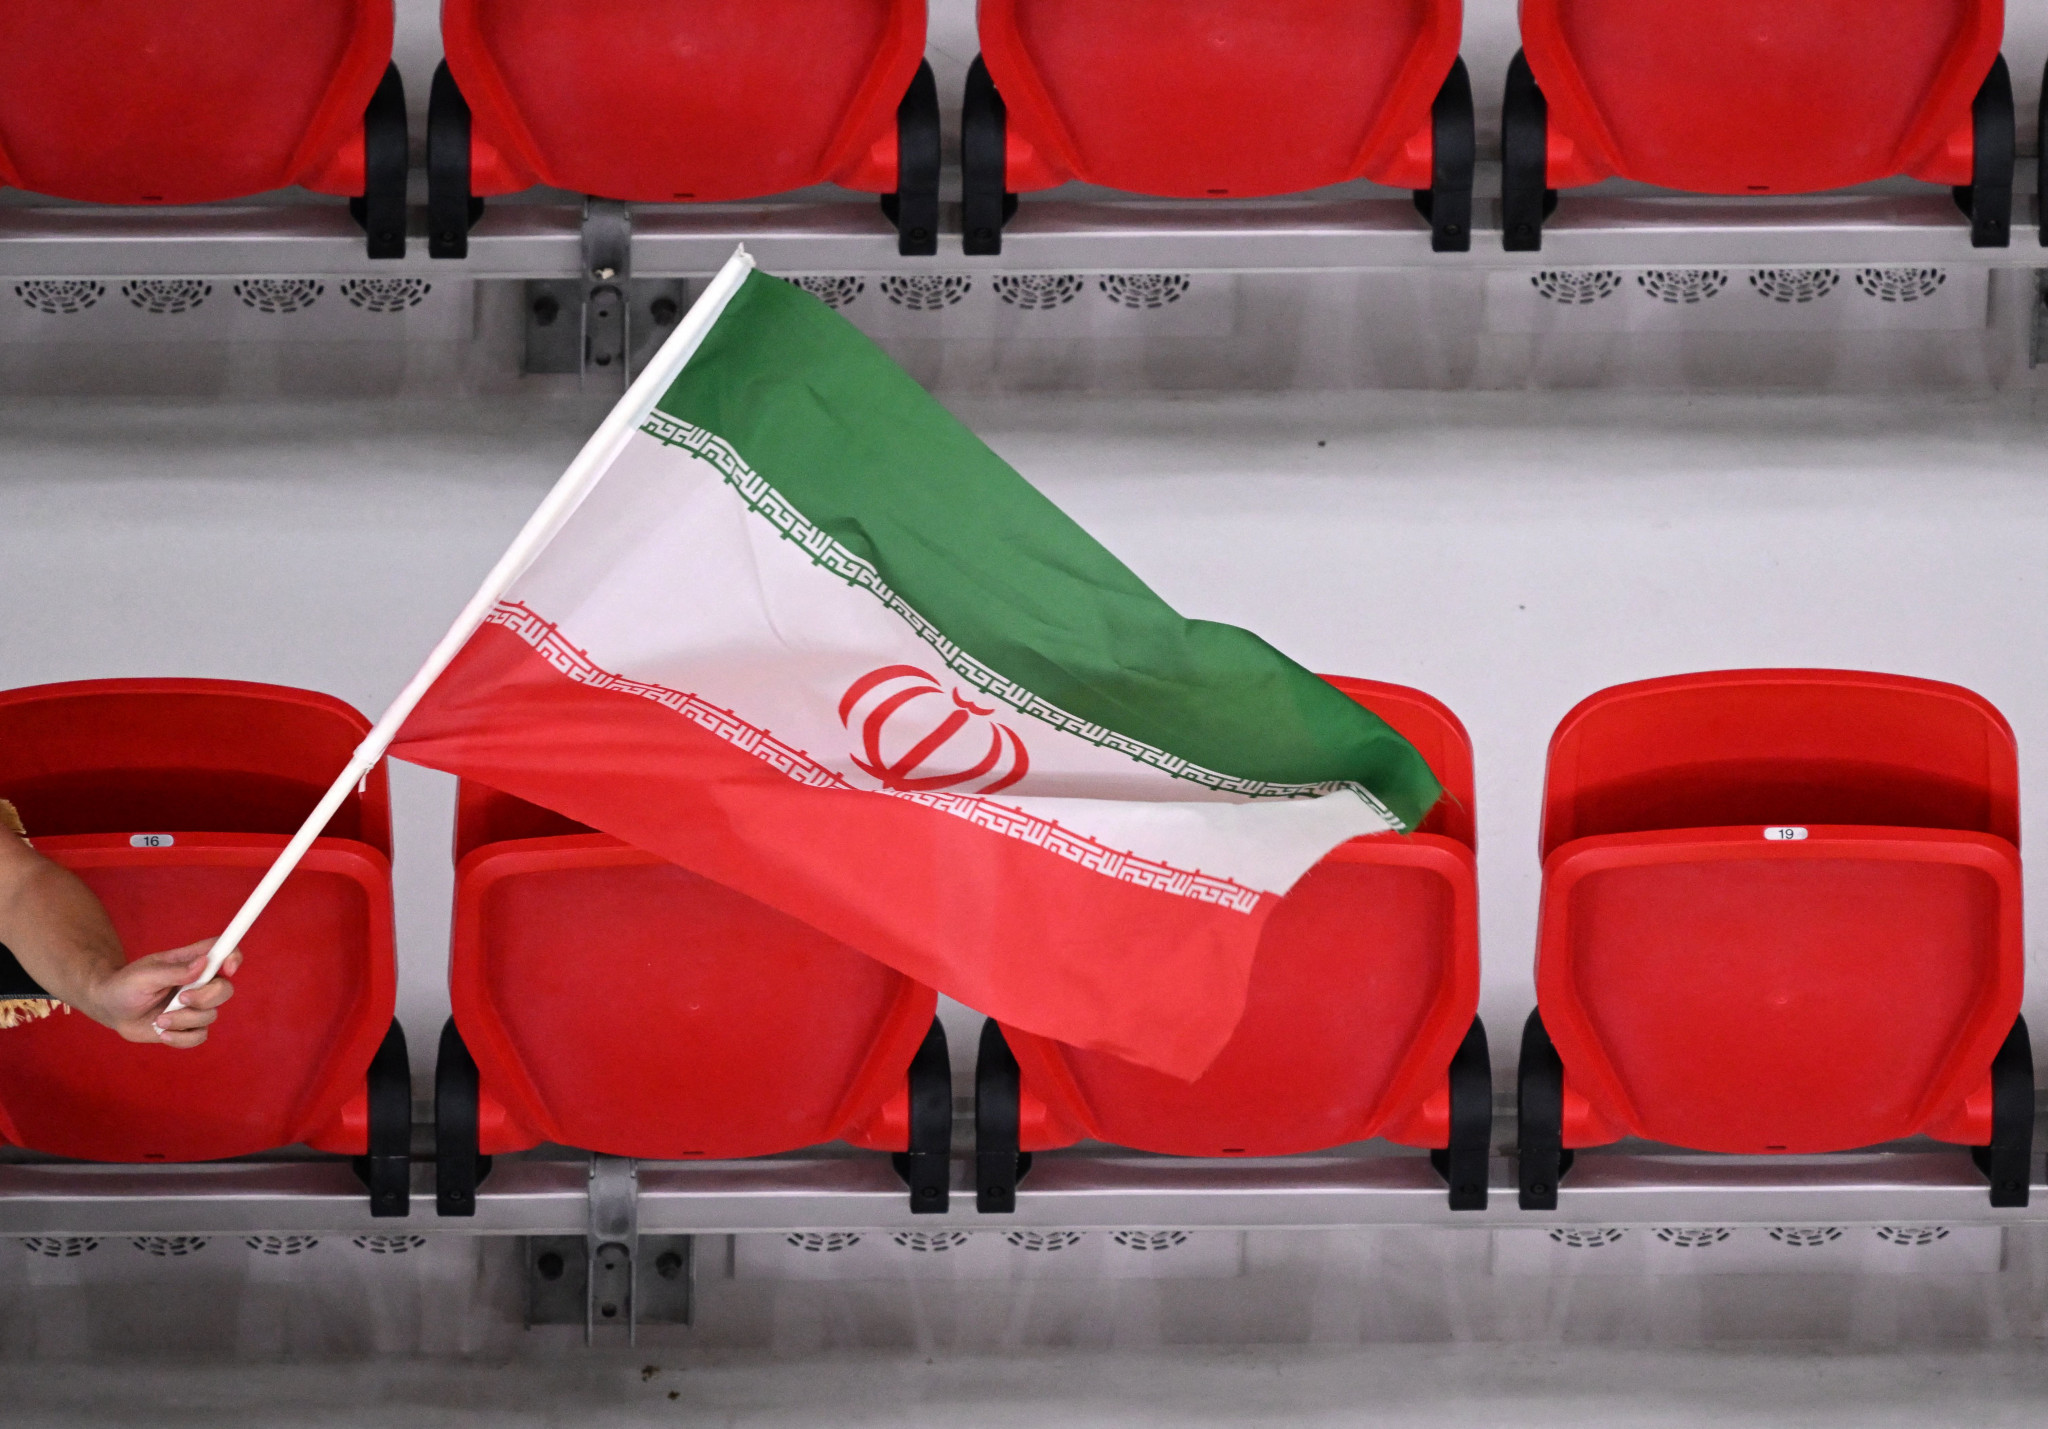 Iran is planning a team of 100 athletes across 11 sports at the Chengdu 2021 FISU Games ©Getty Images